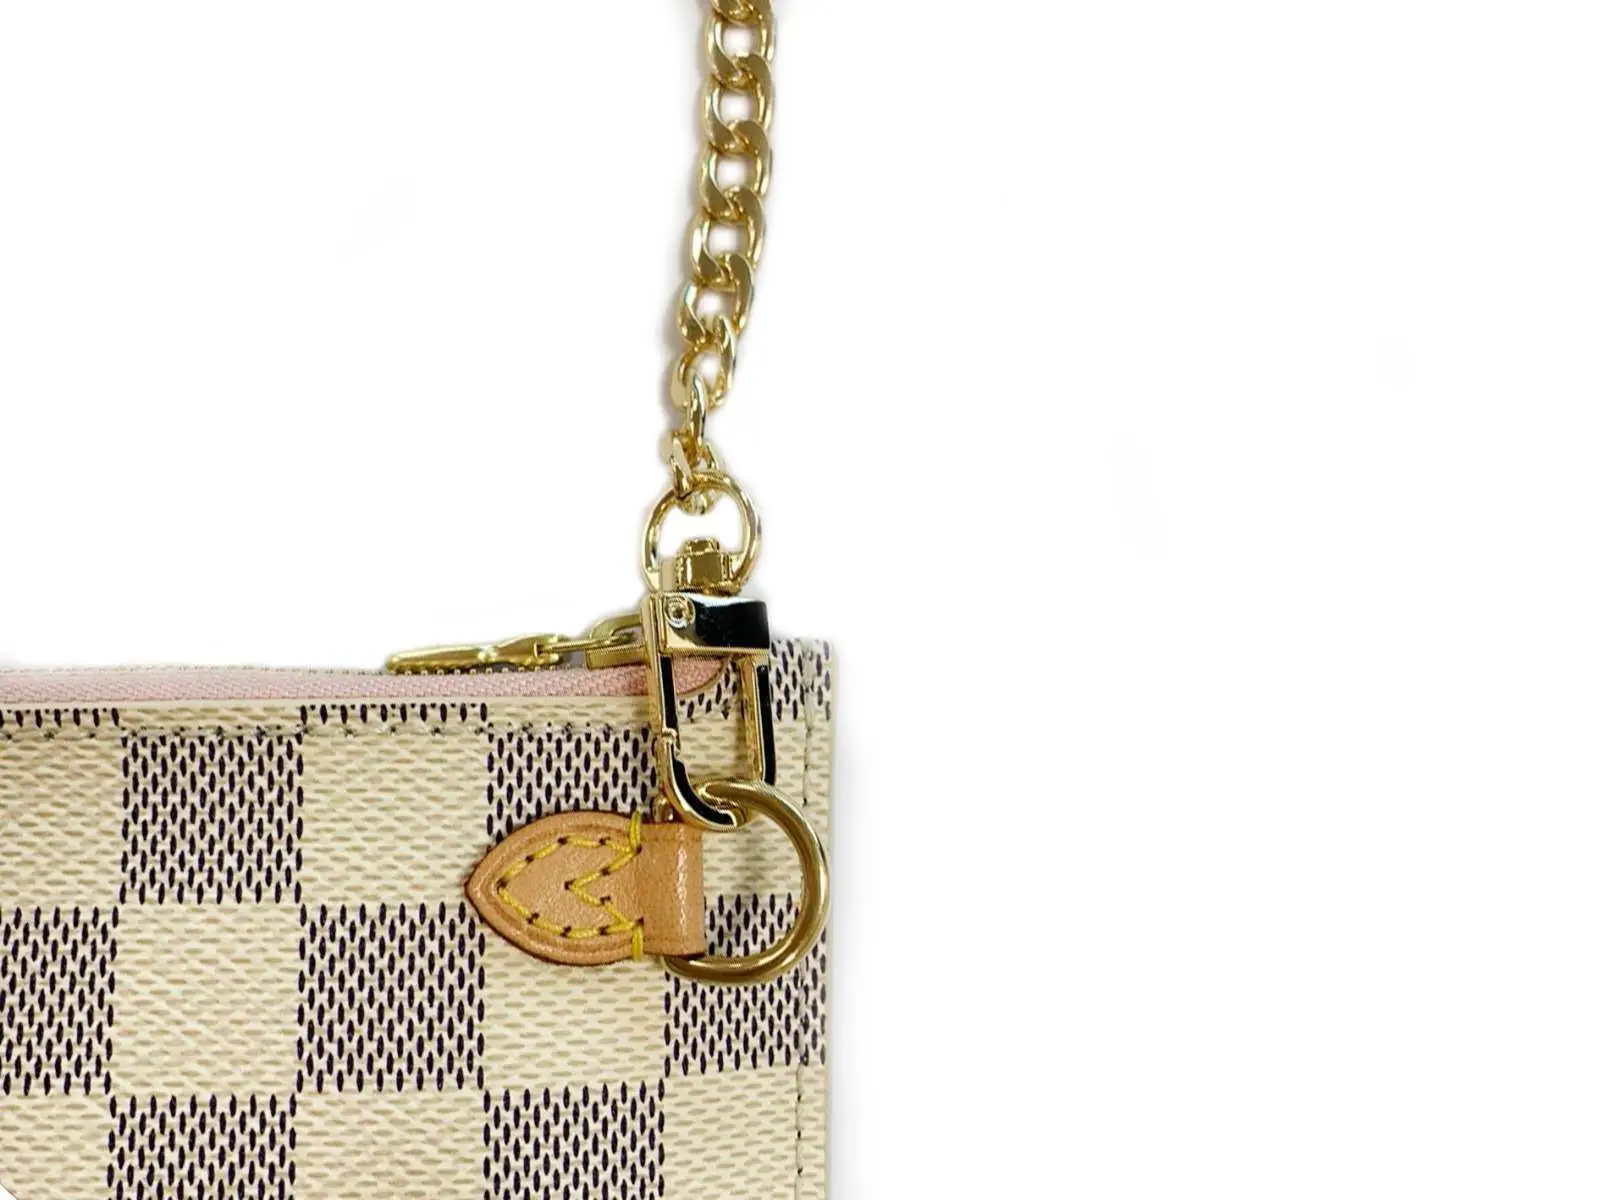 Pouch Converter Kit for Louis Vuitton Neverfull Pouch, Chanel O